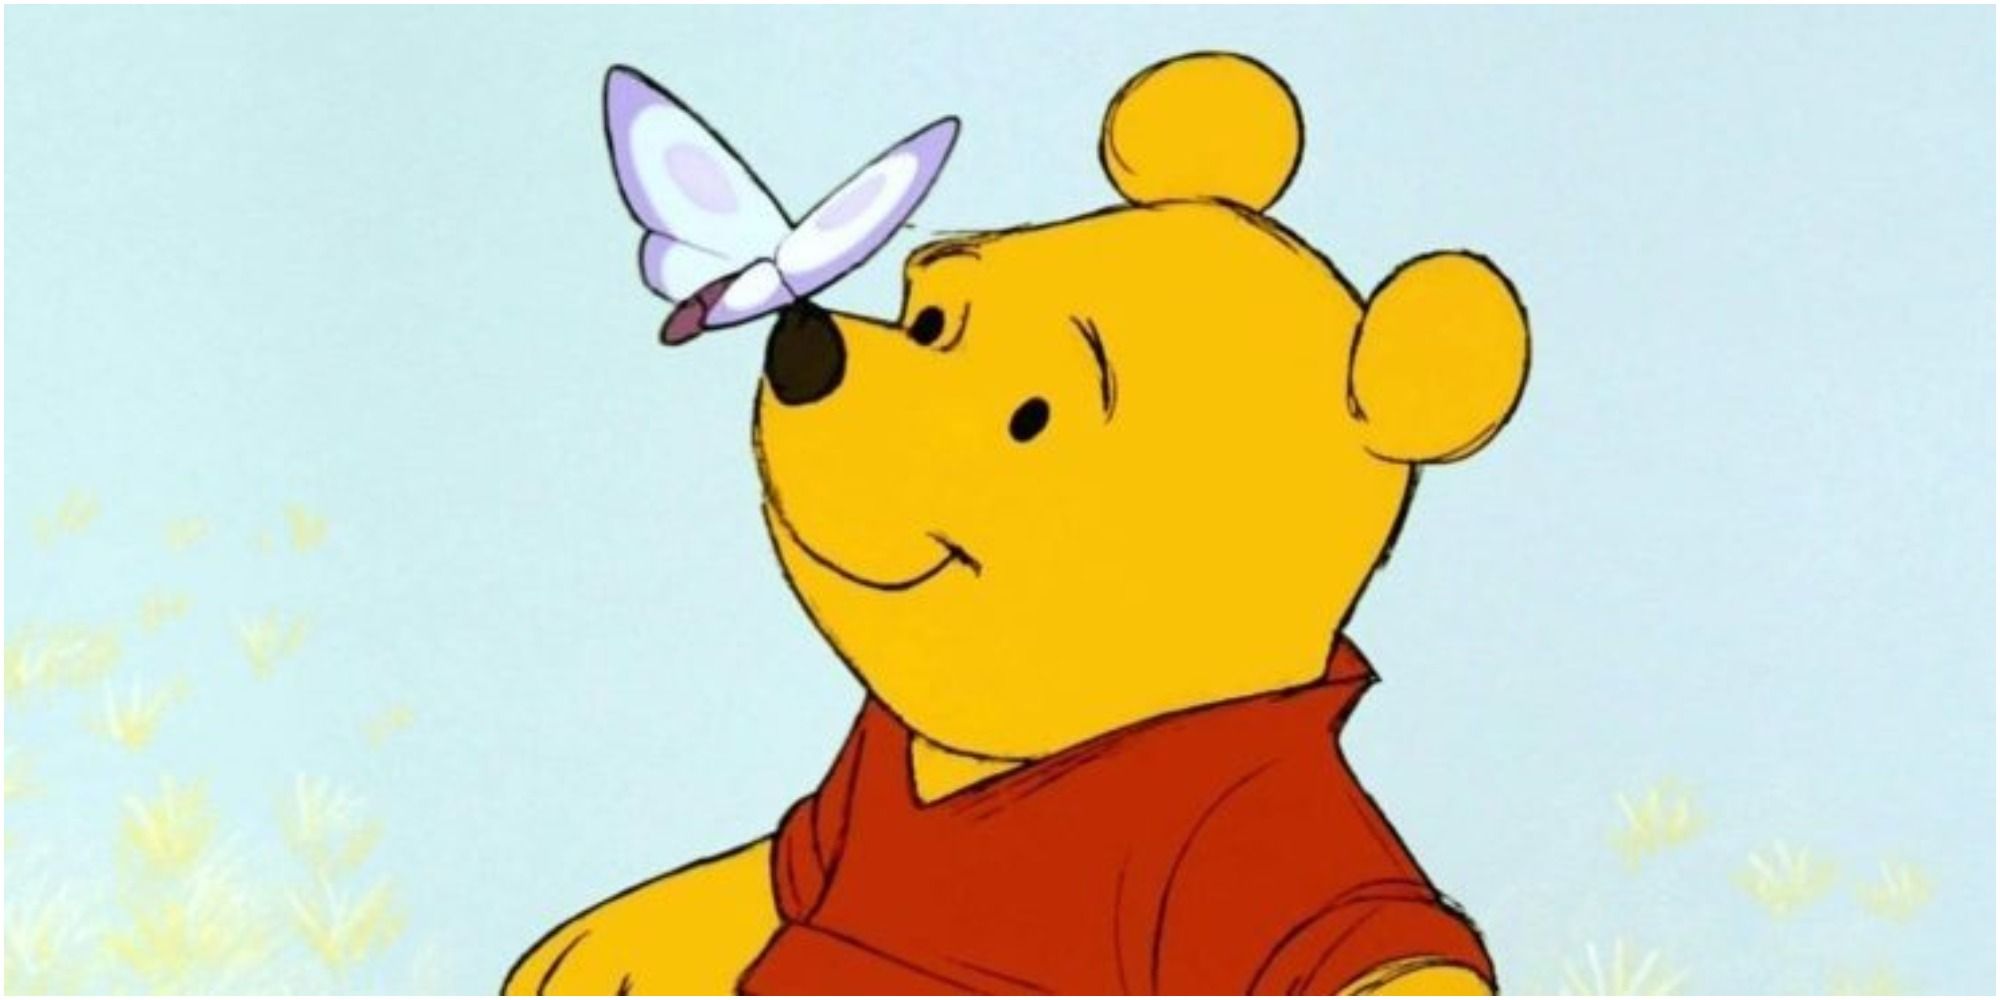 Winnie-the-Pooh Prequel Movie, Series in the Works - But Not From Disney